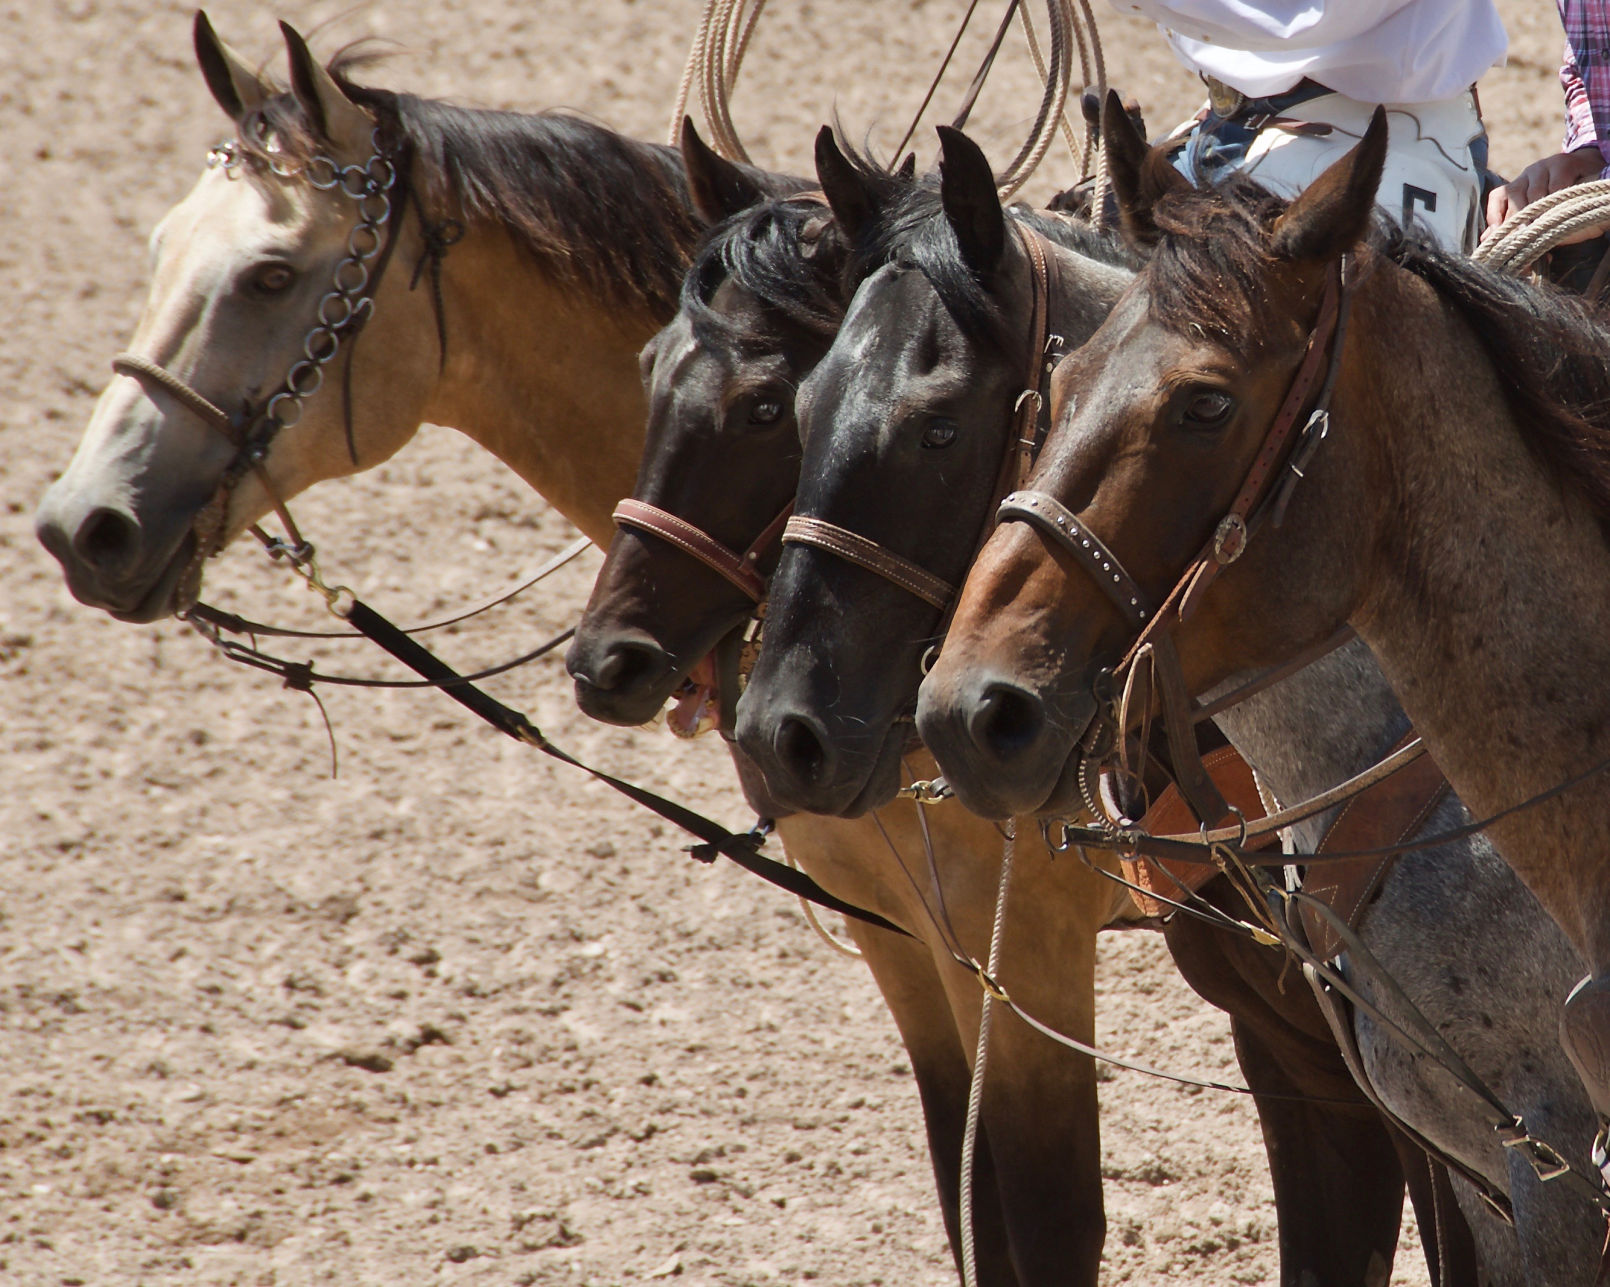 Horses at a rodeo (Journal photo by Jennifer Carrico.)